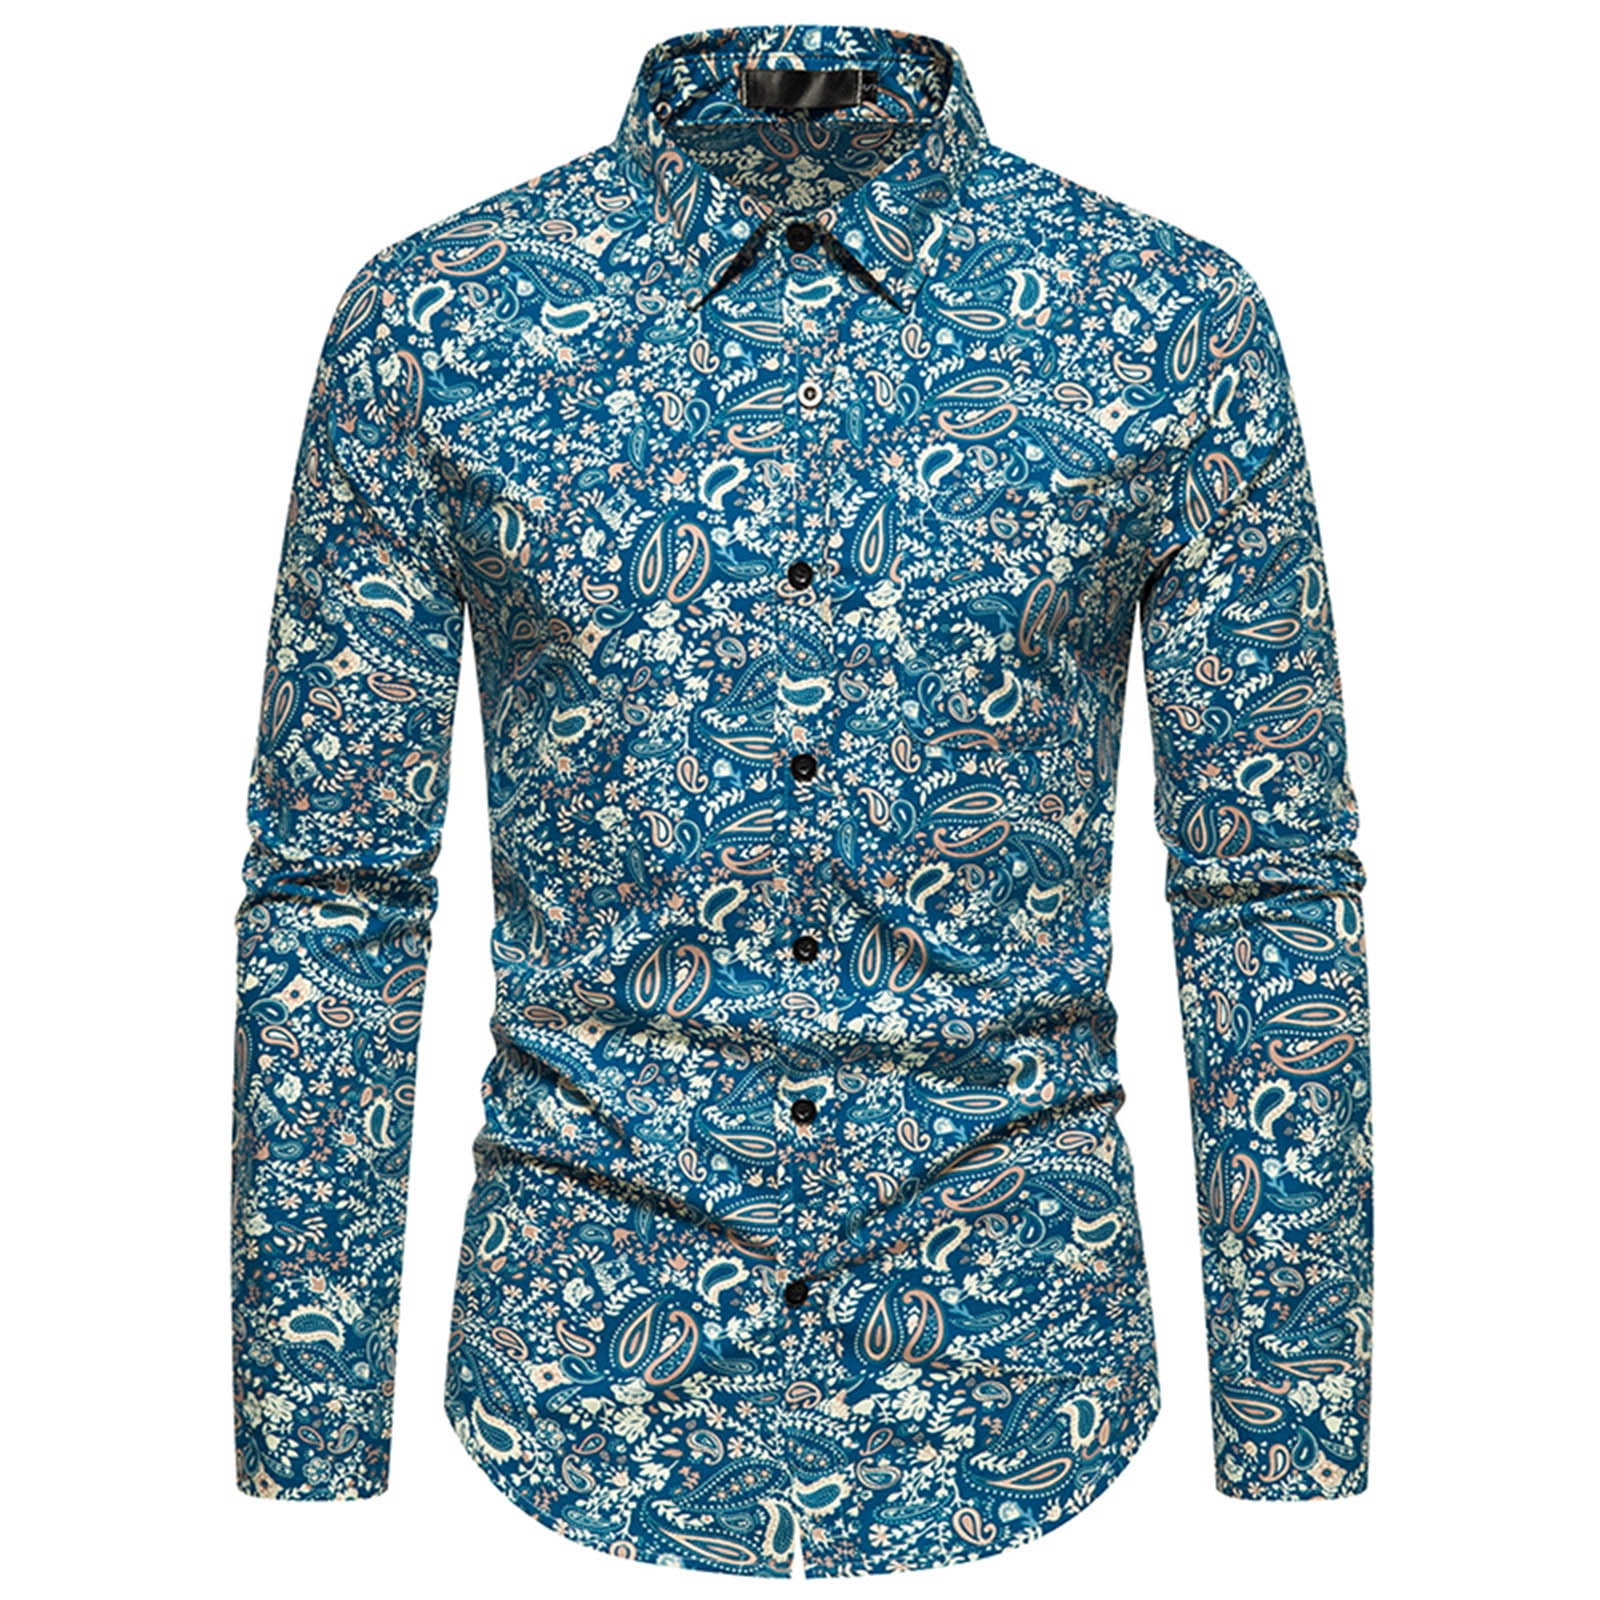 ZCFZJW Mens Paisley Printed Shirts Casual Long Sleeve Button 